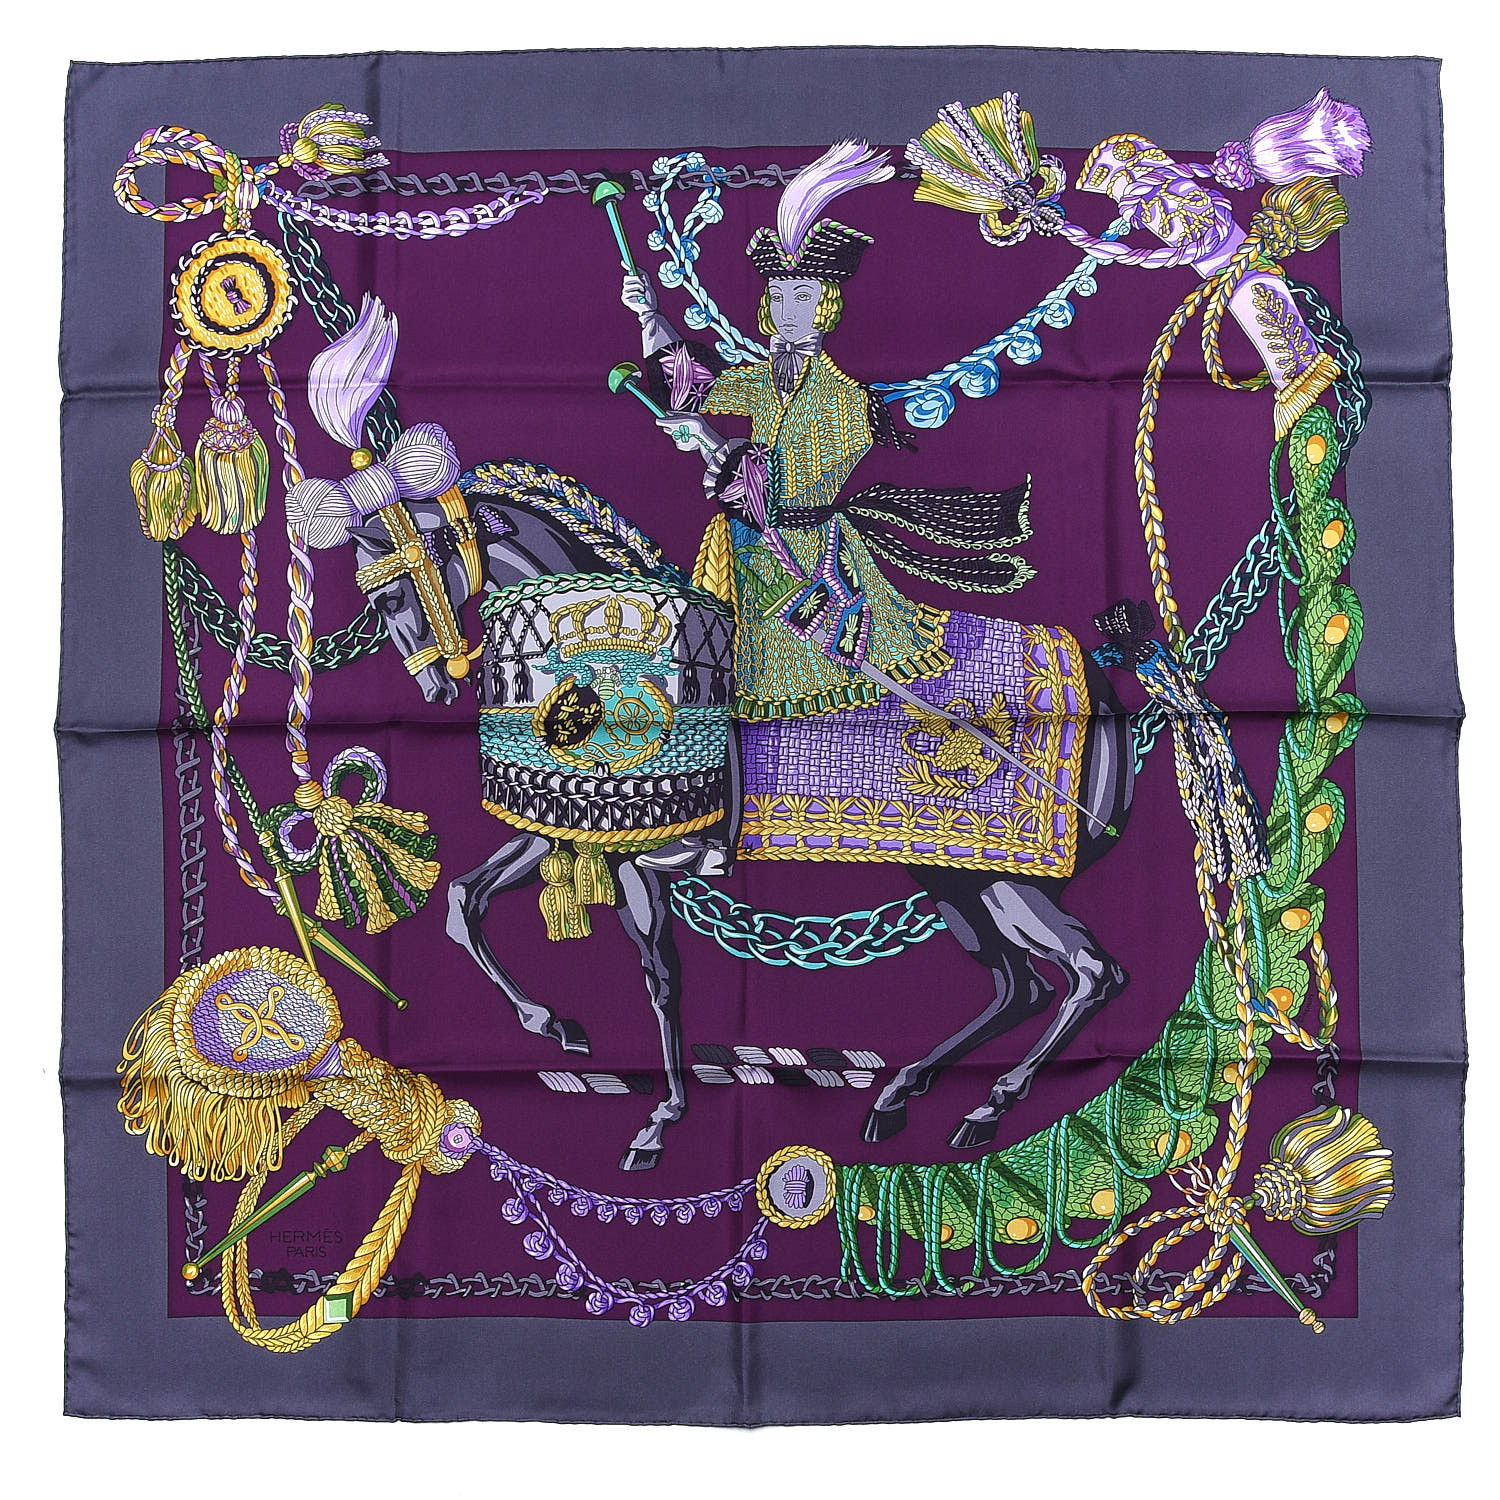 HERMES Silk Le Timbalier Scarf 90 Anthracite Violet Vert 368206 